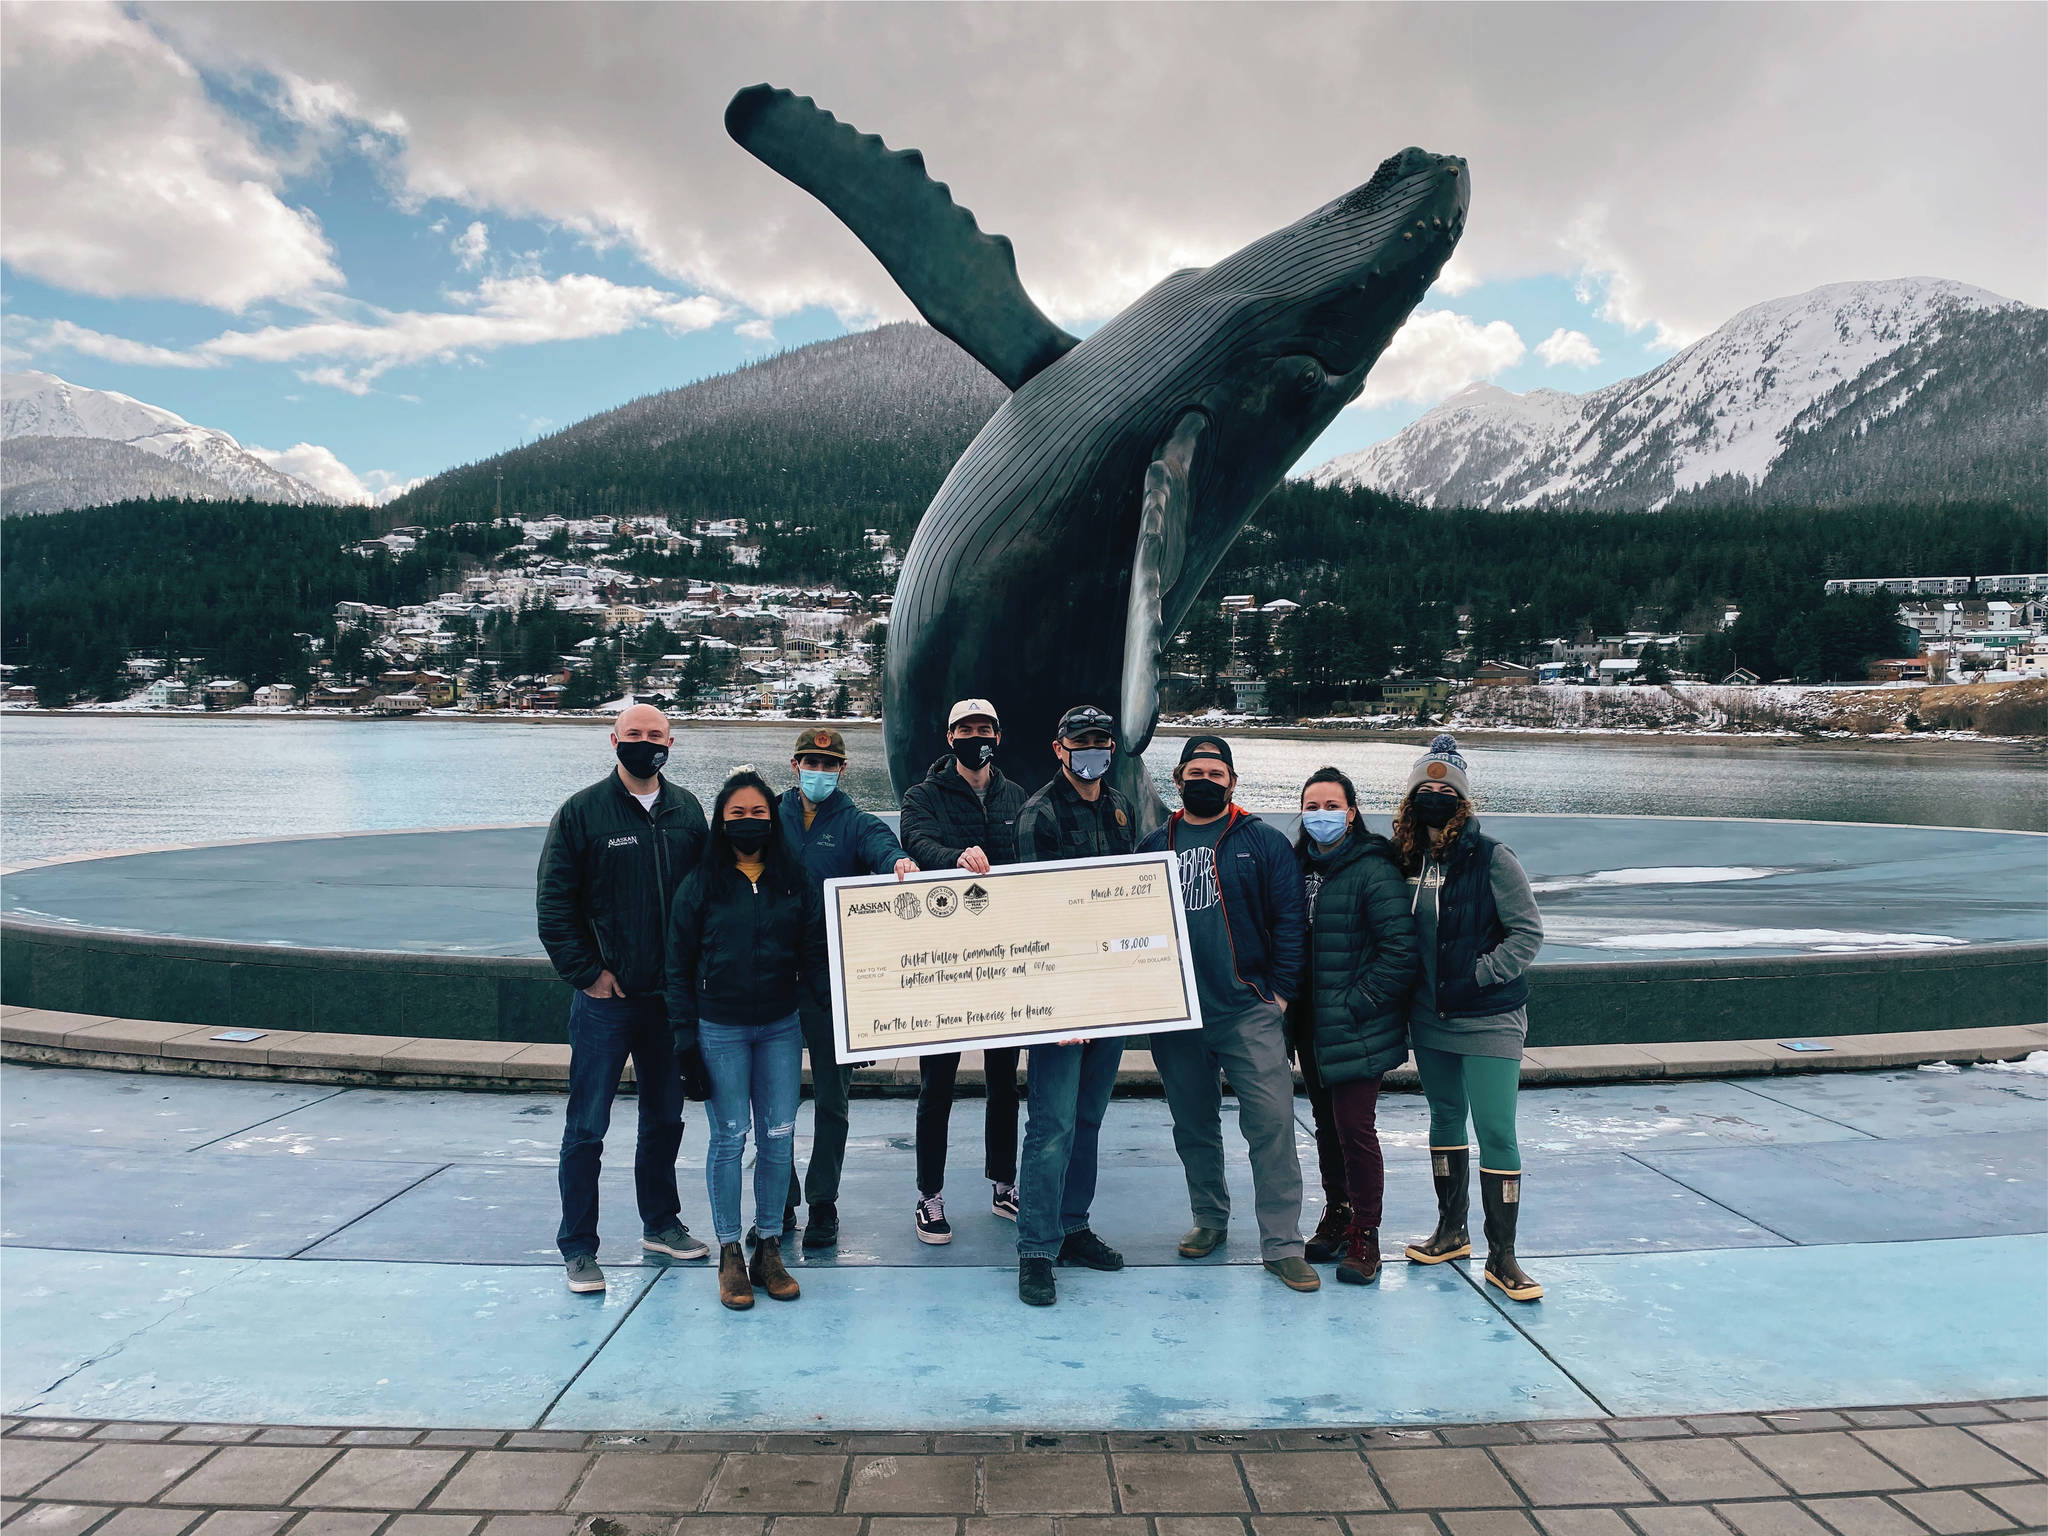 Courtesy photo / Meghan Chambers 
Juneau’s breweries, with a funds-matching donation from the Rasmuson Foundation, donated $36,000 to the Chilkat Valley Community Foundation to assist with relief from last year’s fatal landslides as part of the Pour the Love fundraiser on March 30, 2021.